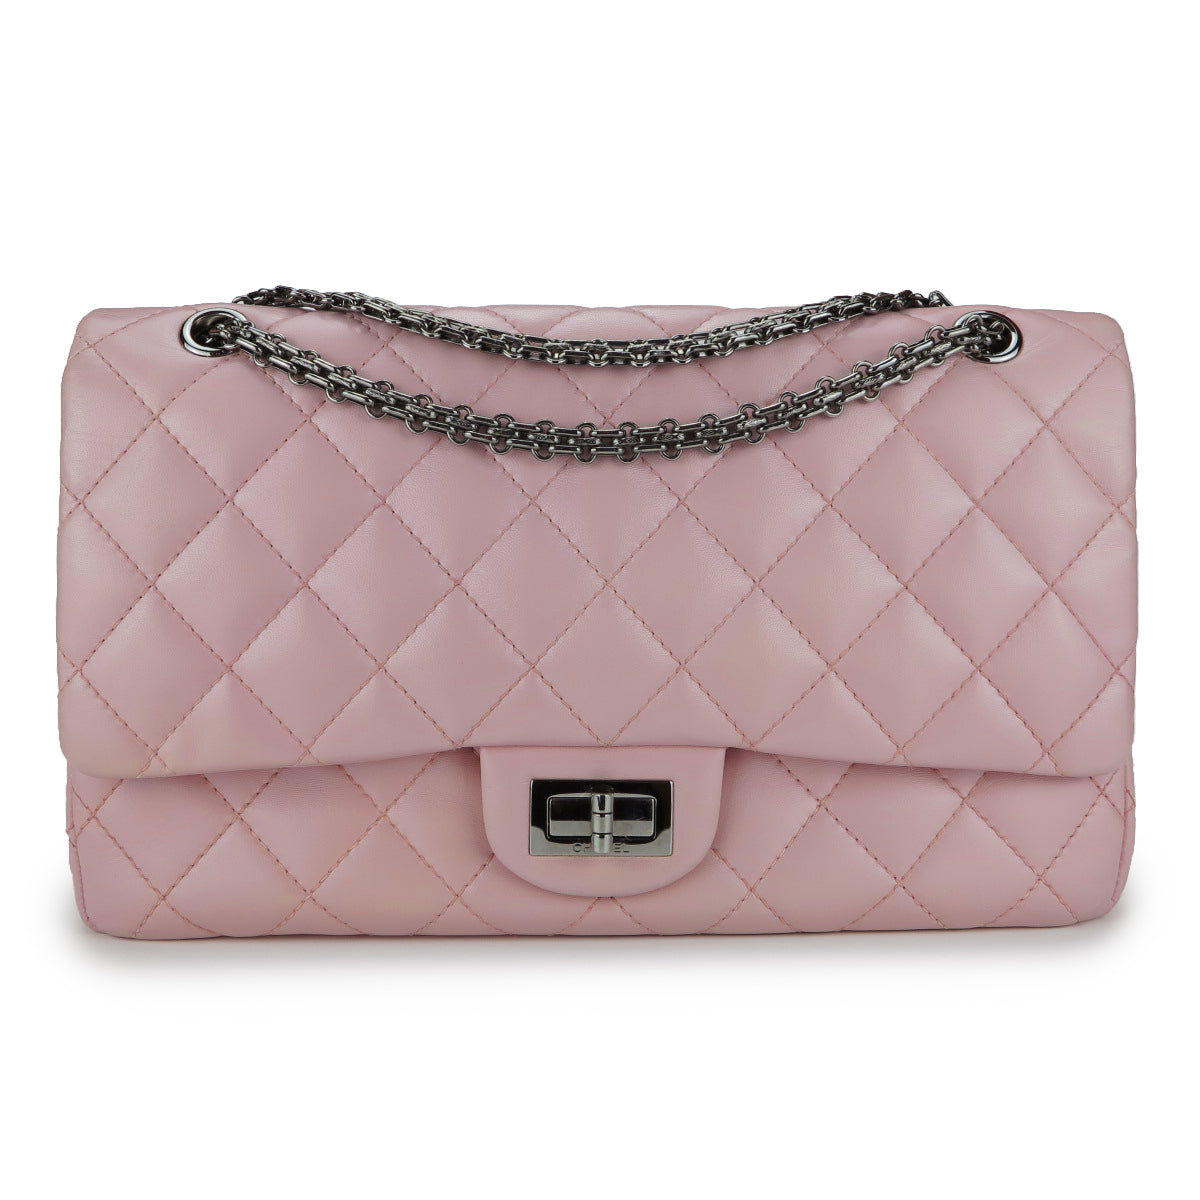 2.55 Reissue Flap Bag Size 227 in Pearlized Pink Calfskin